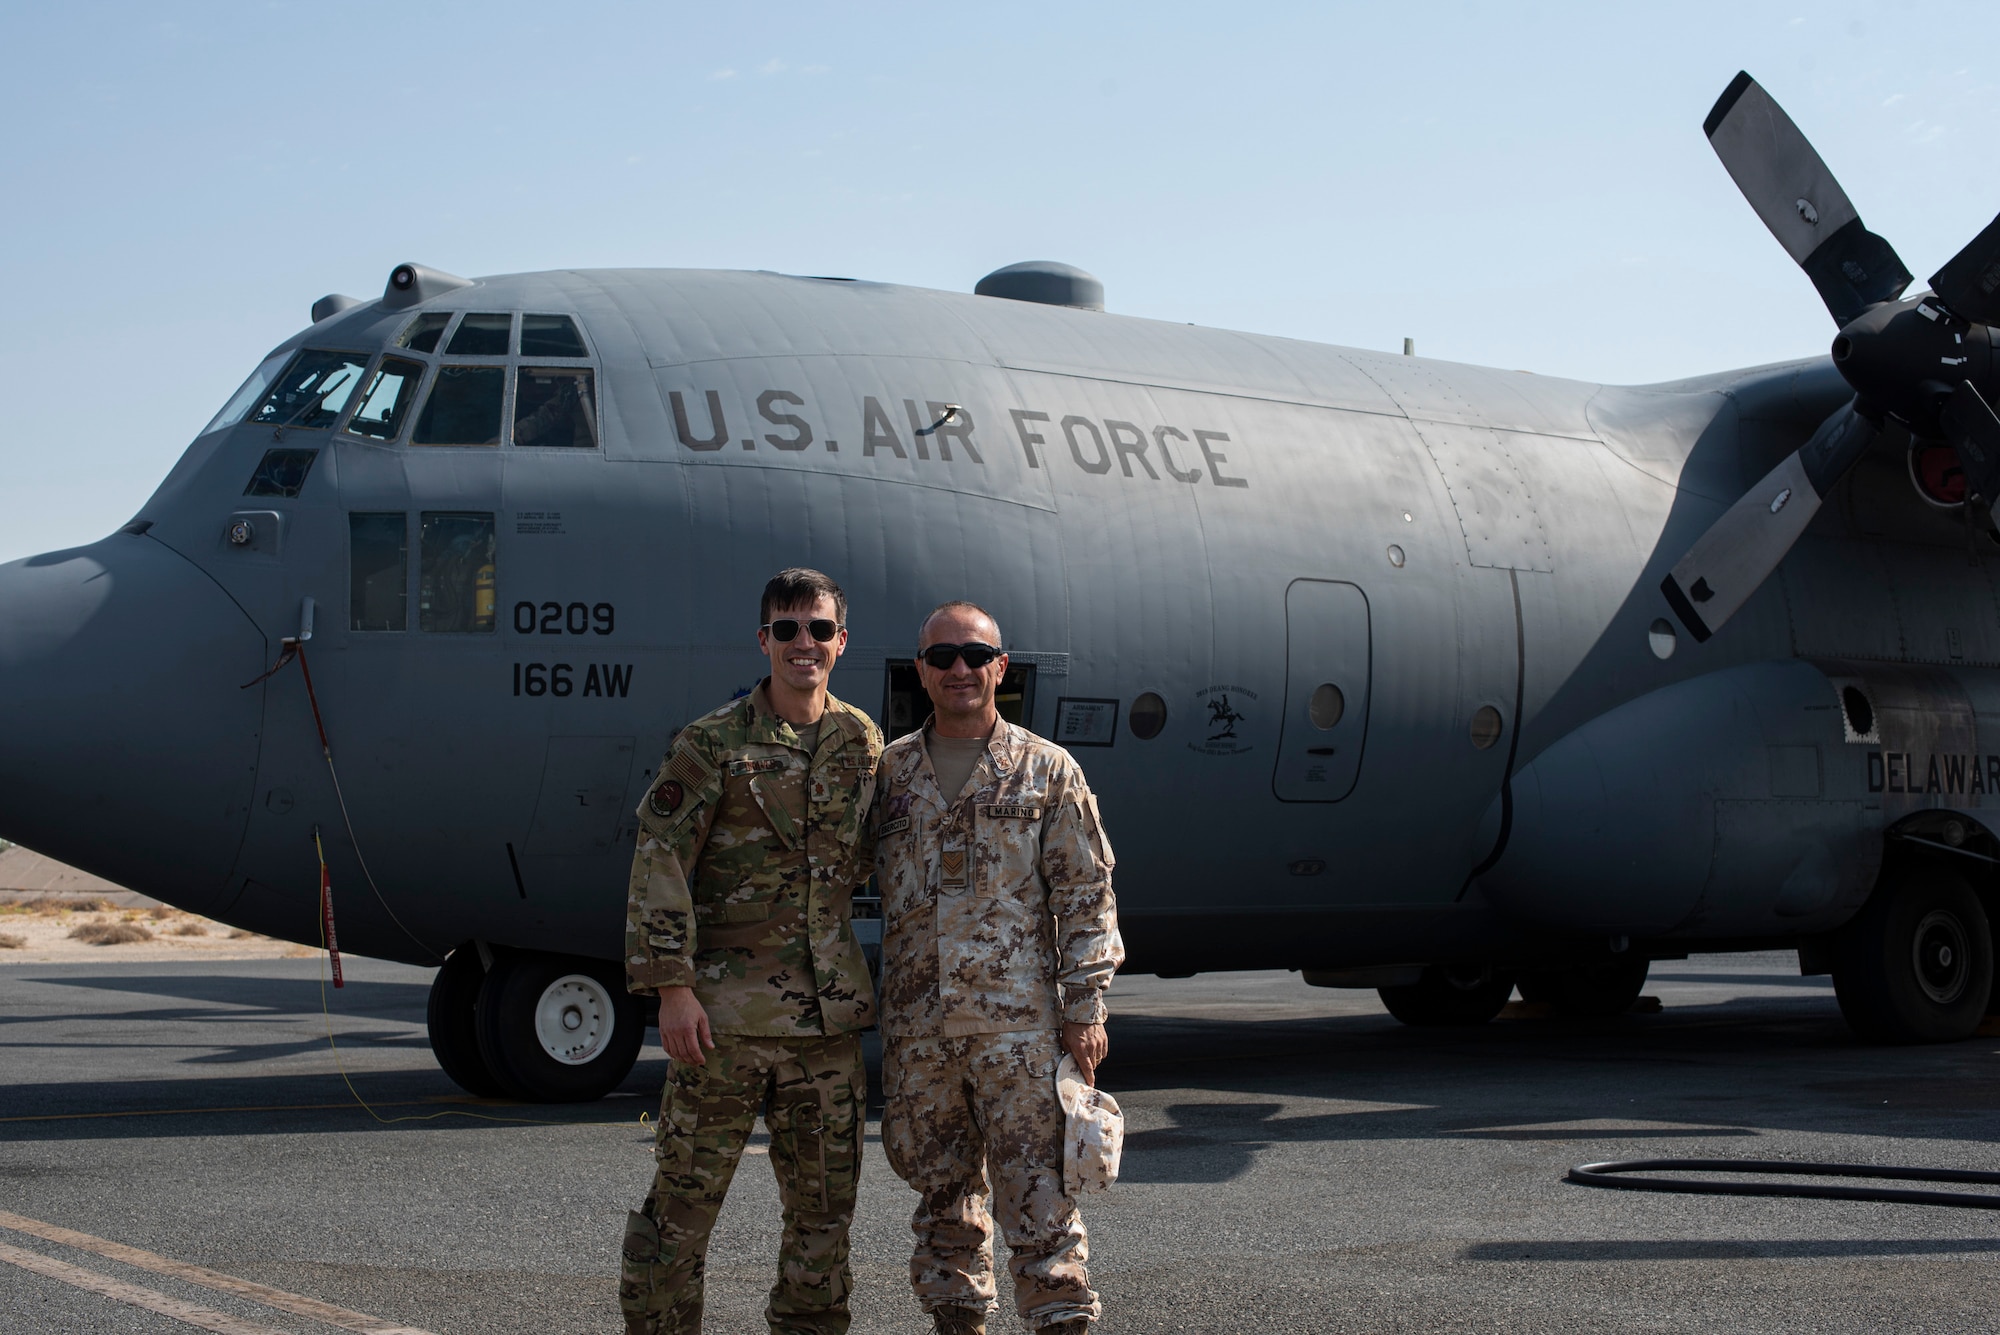 A USAF pilot and Italian Air Force member pose in front of a C-130H Hercules